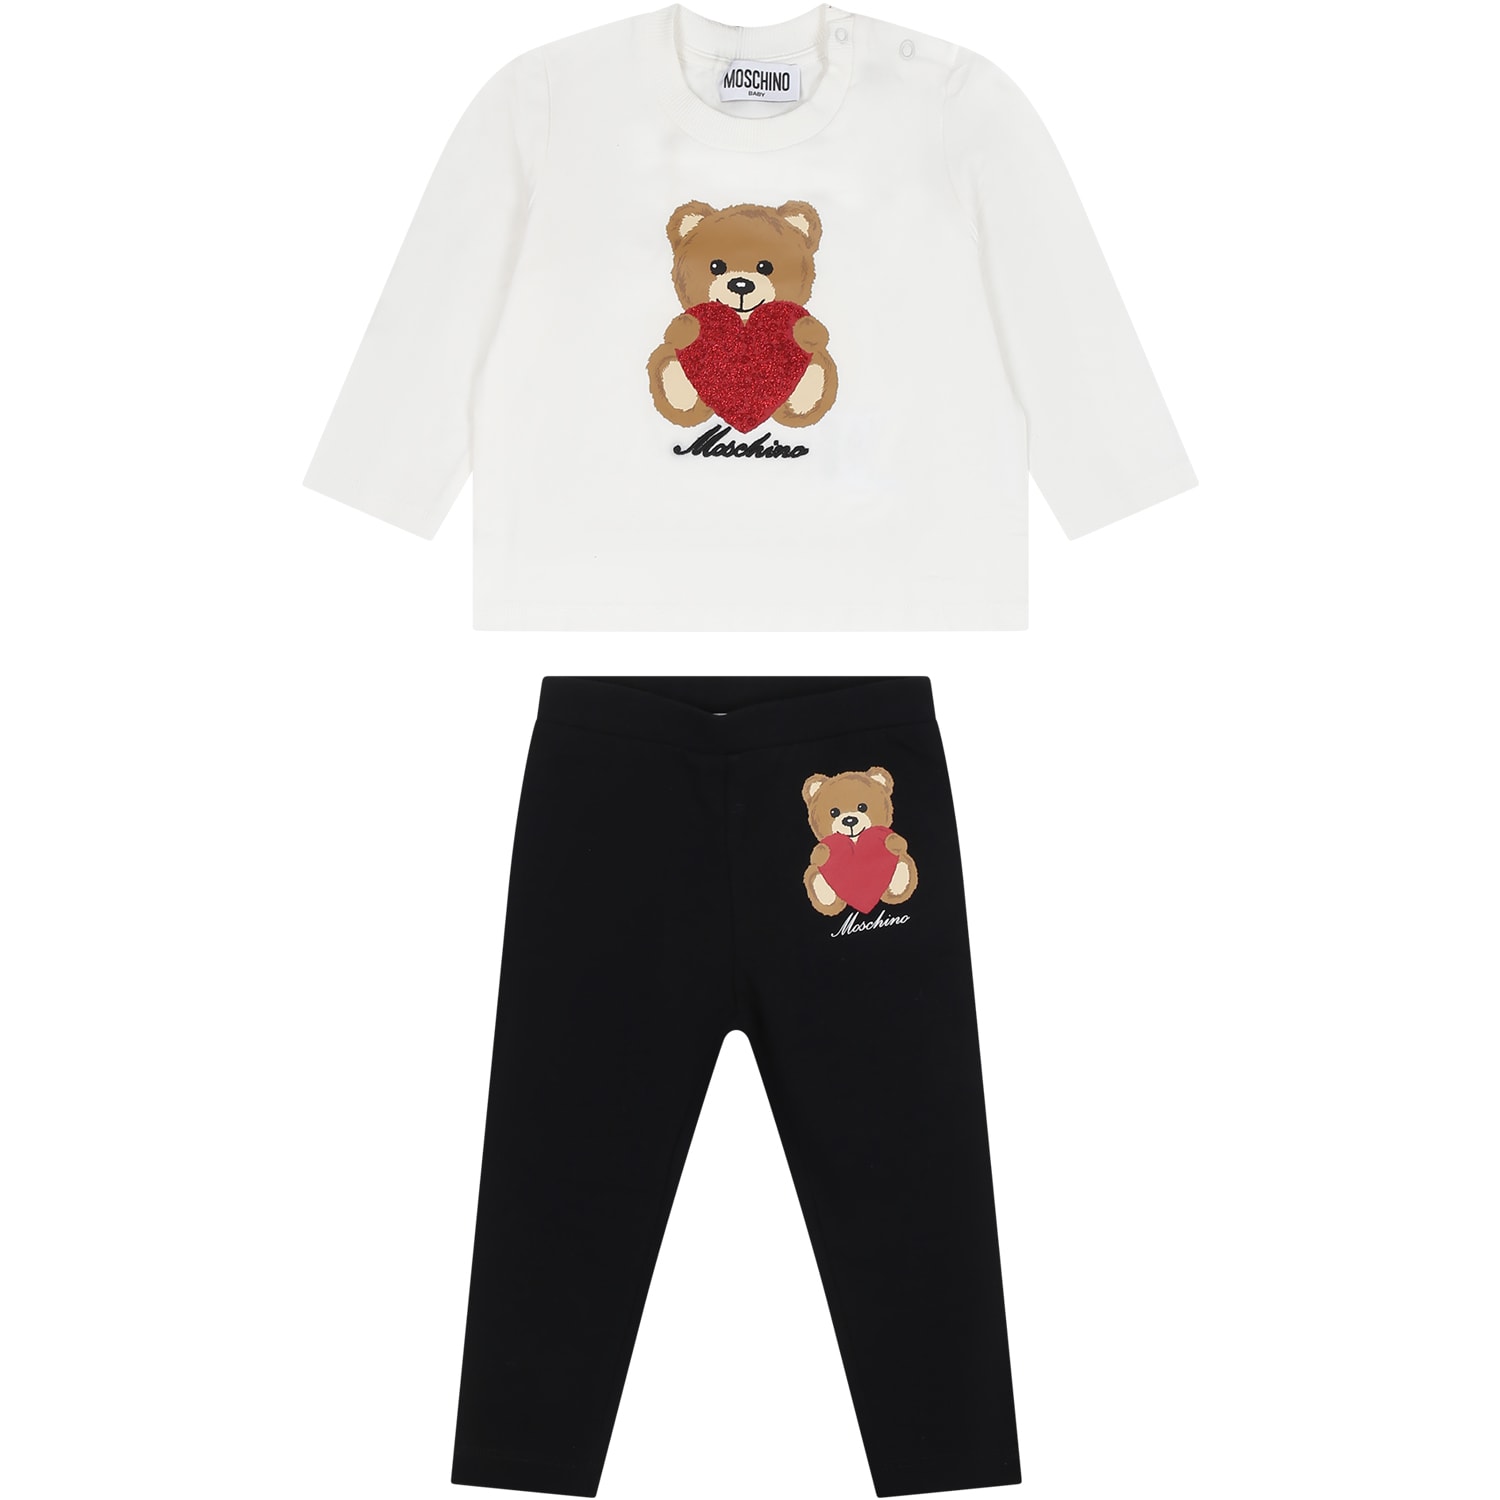 MOSCHINO WHITE TRACKSUIT FOR BABY GIRL WITH TEDDY BEAR AND LOGO